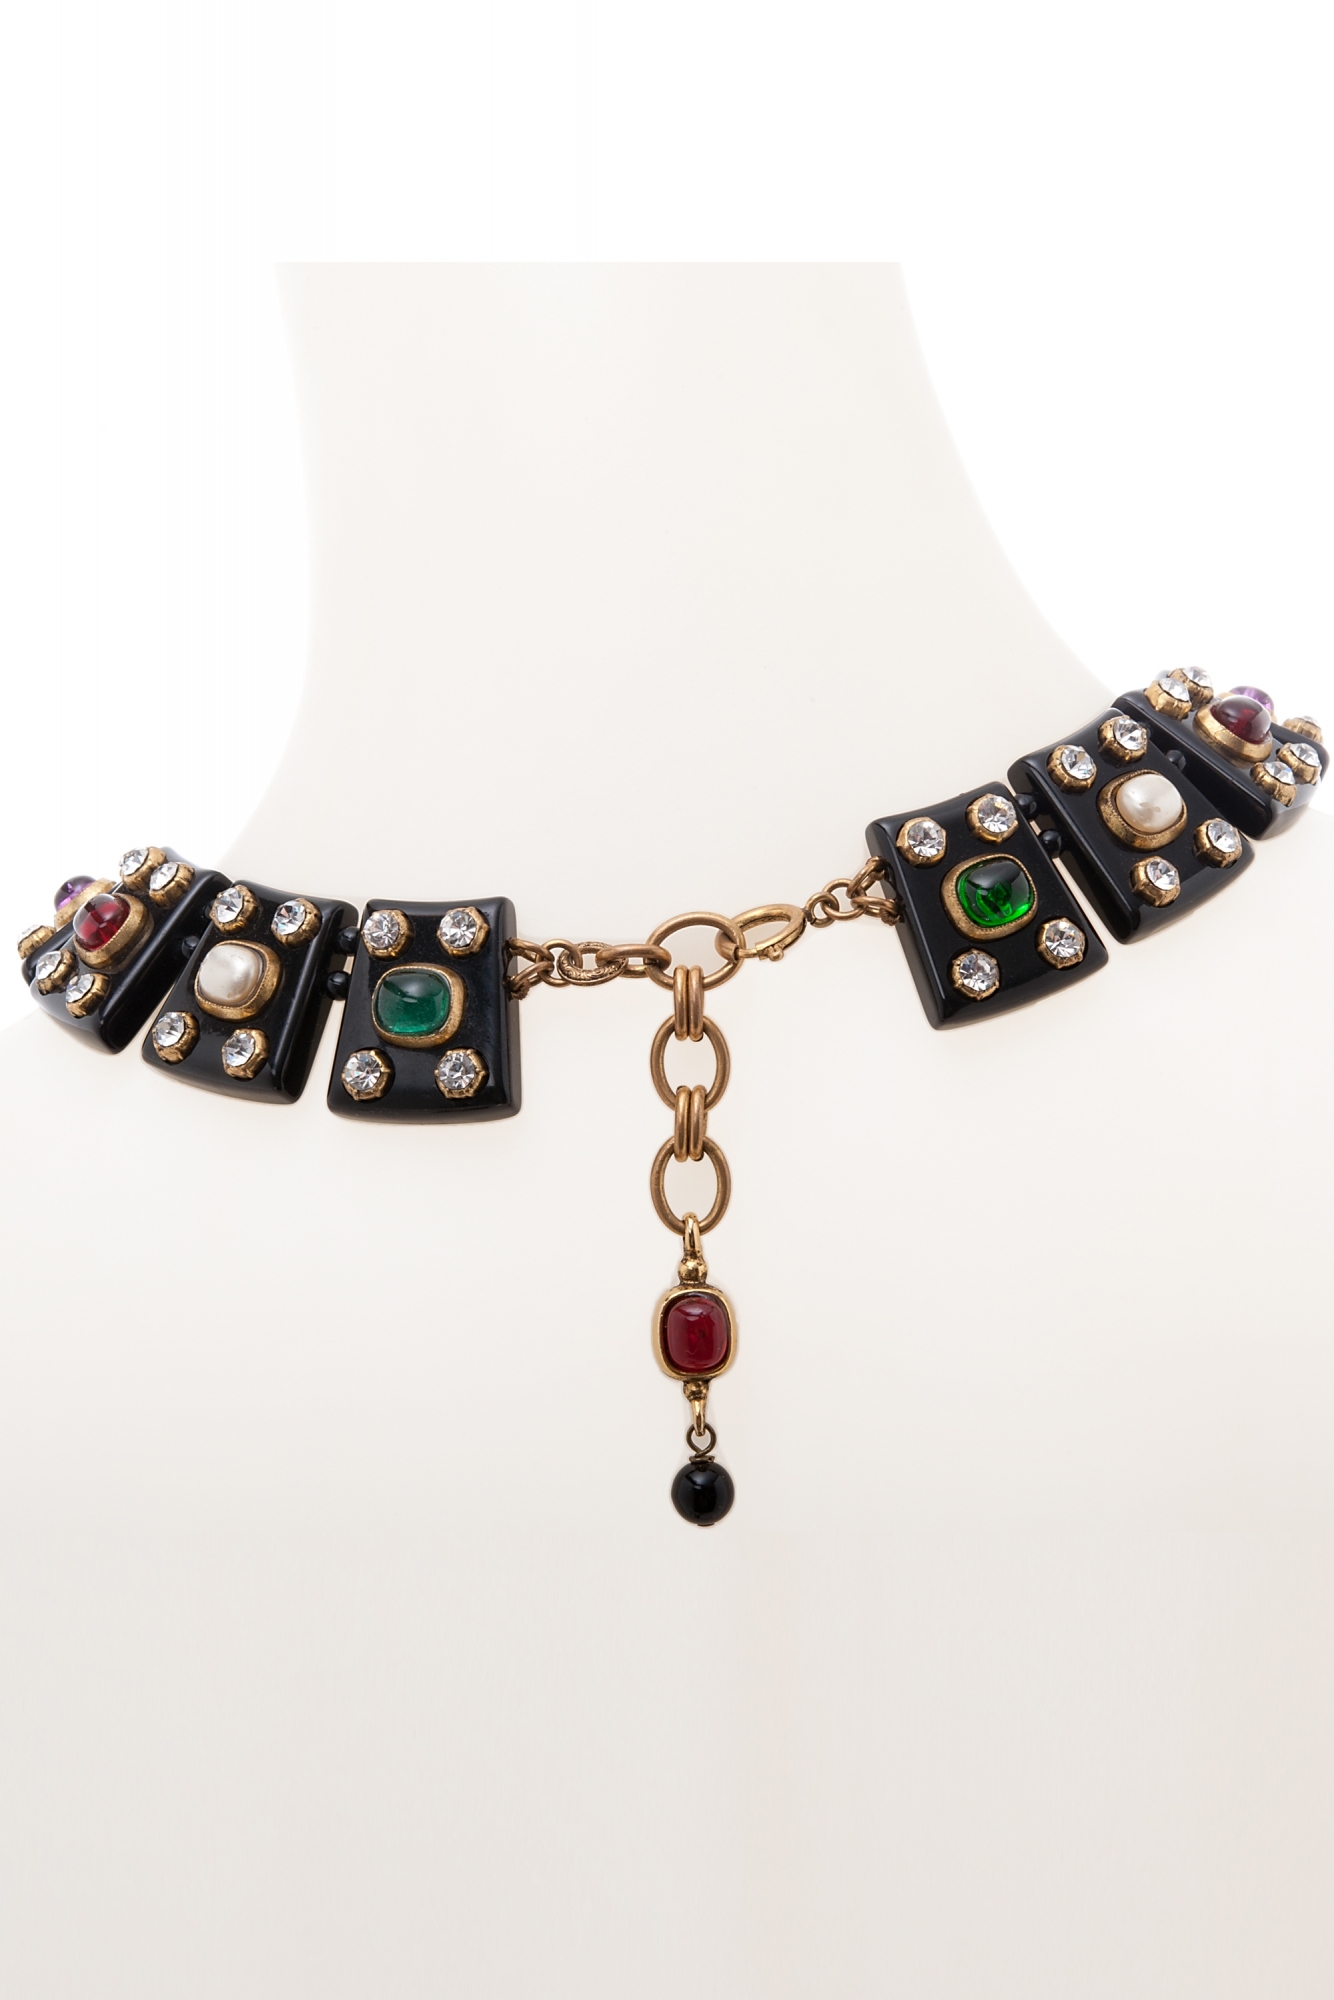 Chanel Exceptional Gripoix Necklace c.1988 - Katheley's